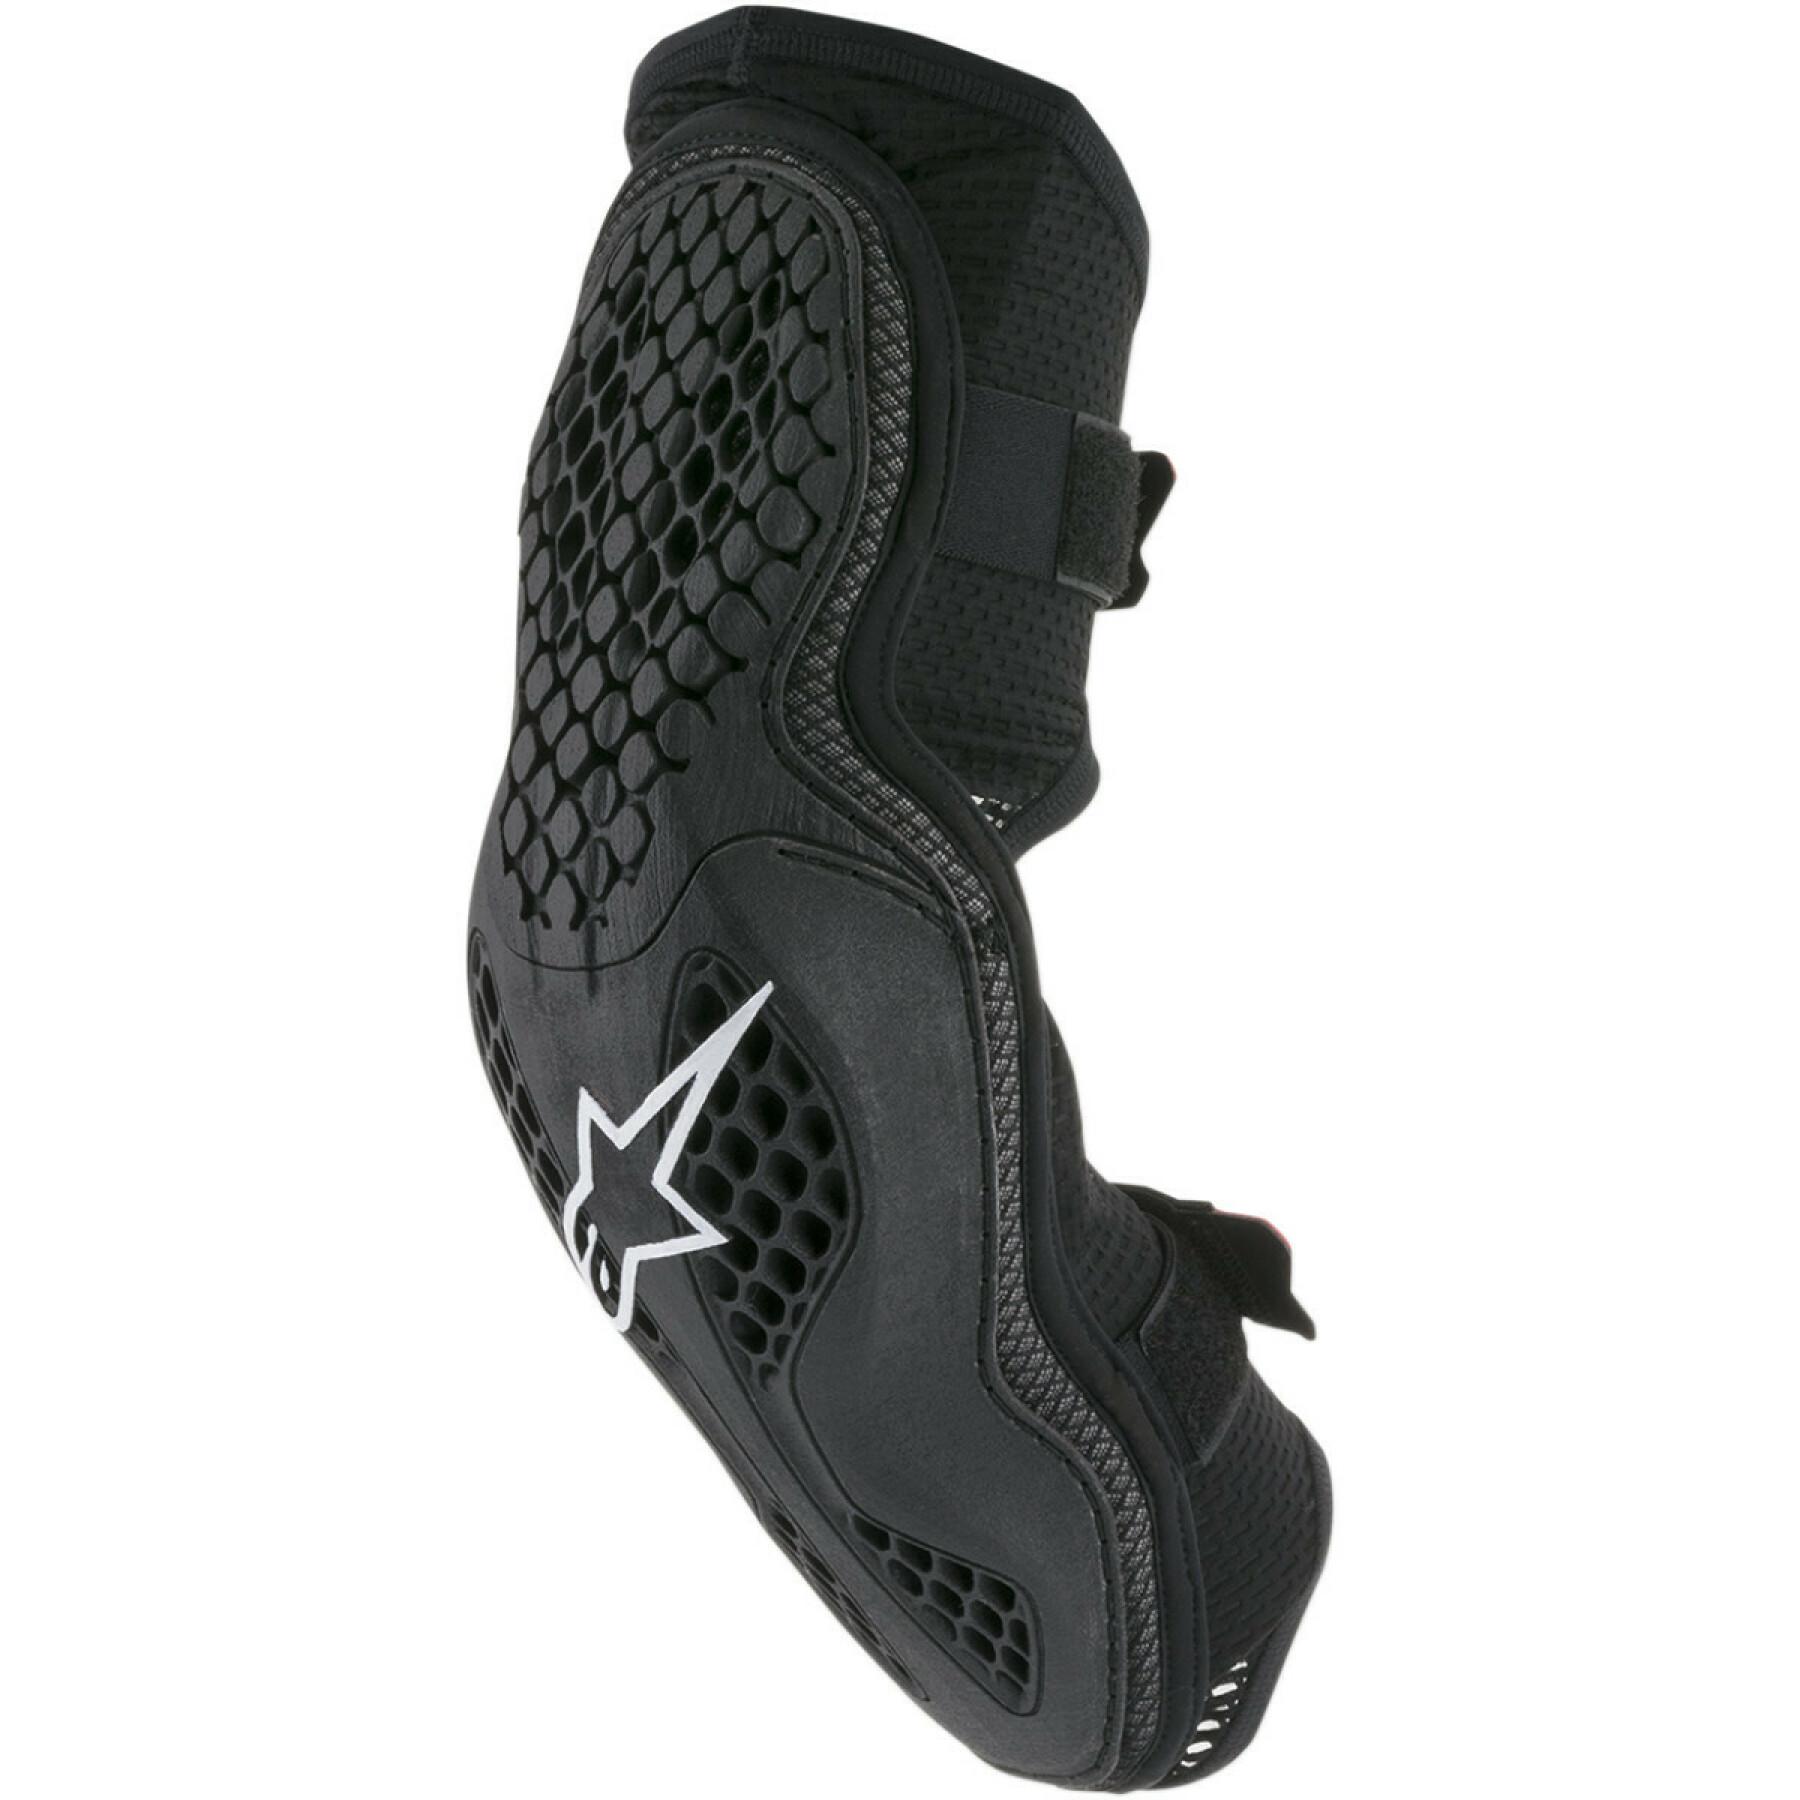 Elbow protectors for motorcycle cross Alpinestars sequence